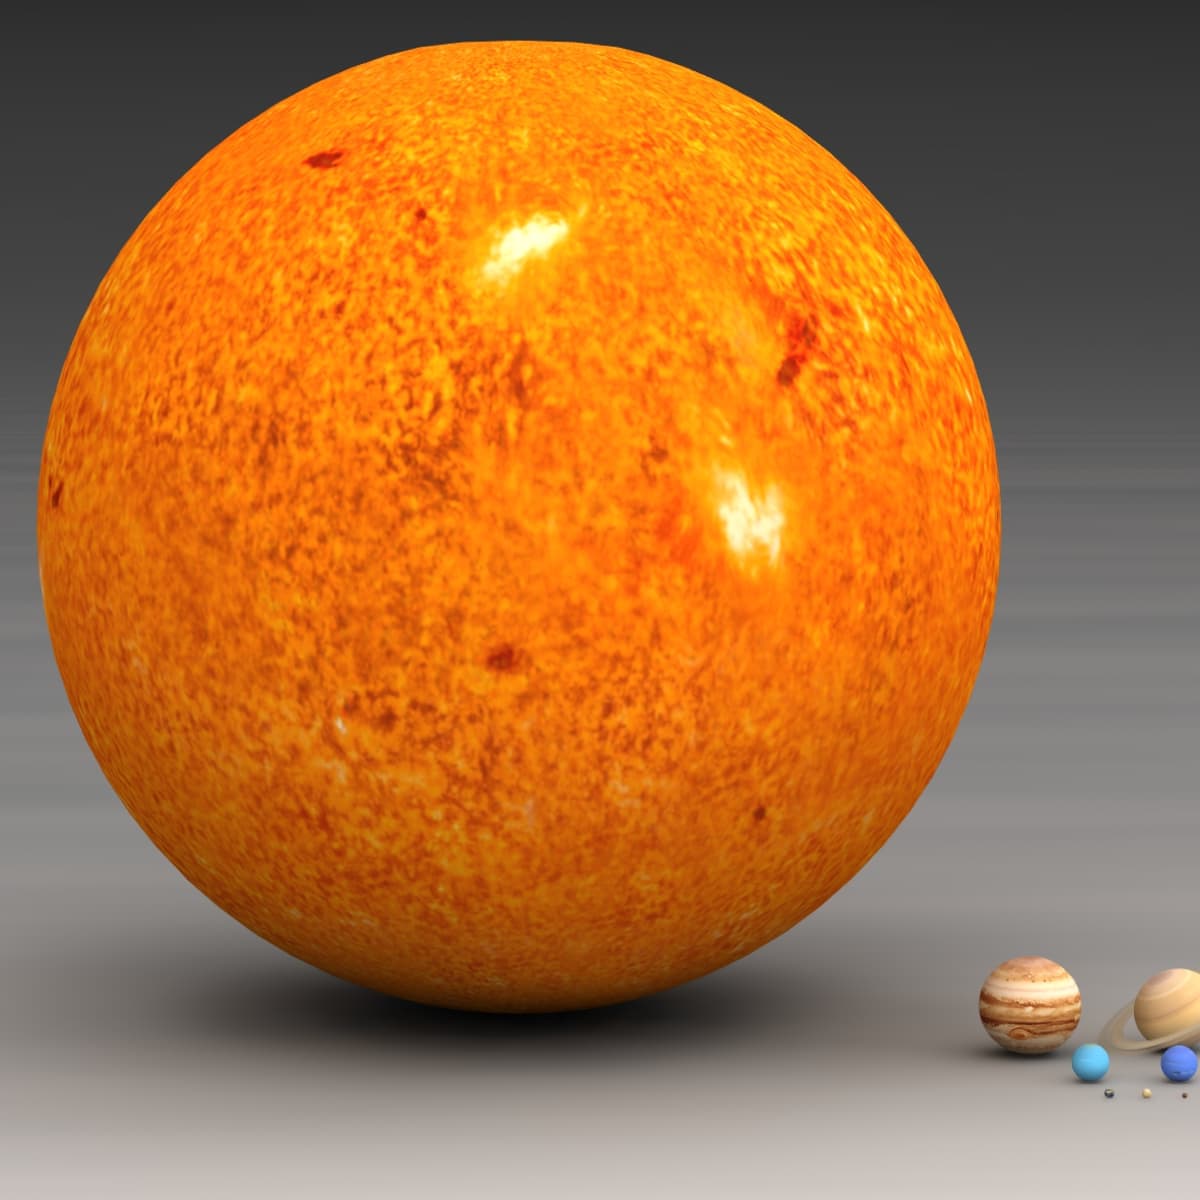 antares star size